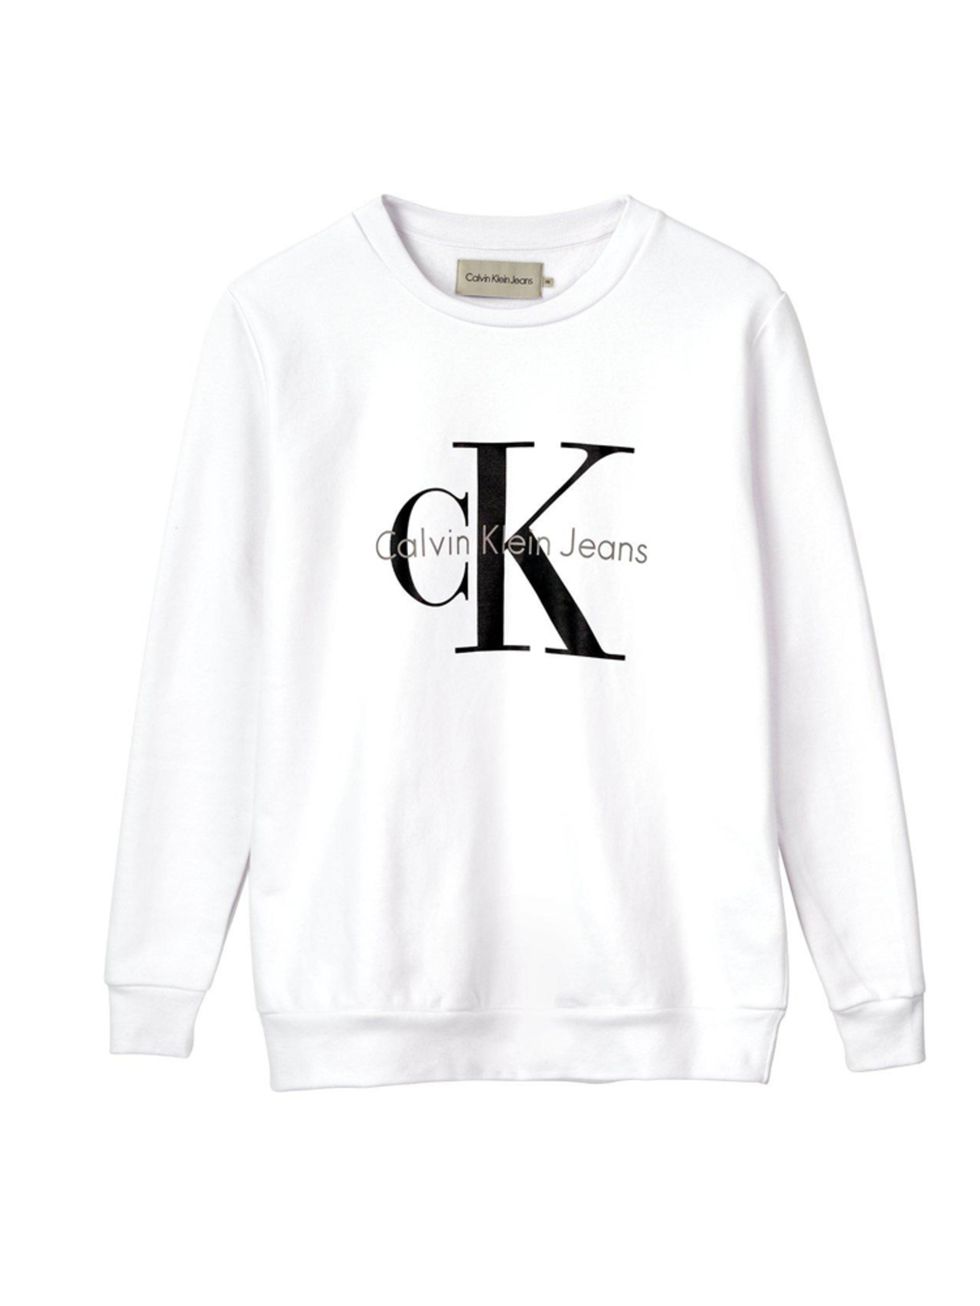 <p>Calvin Klein Sweatshirt, £90 at <a href="http://www.veryexclusive.co.uk/calvin-klein-crew-neck-logo-sweatshirt-white/1600058200.prd" target="_blank">veryexclsuive.co.uk</a> </p>

<p>Wear now: this one is all about that grungy layering. First comes the 